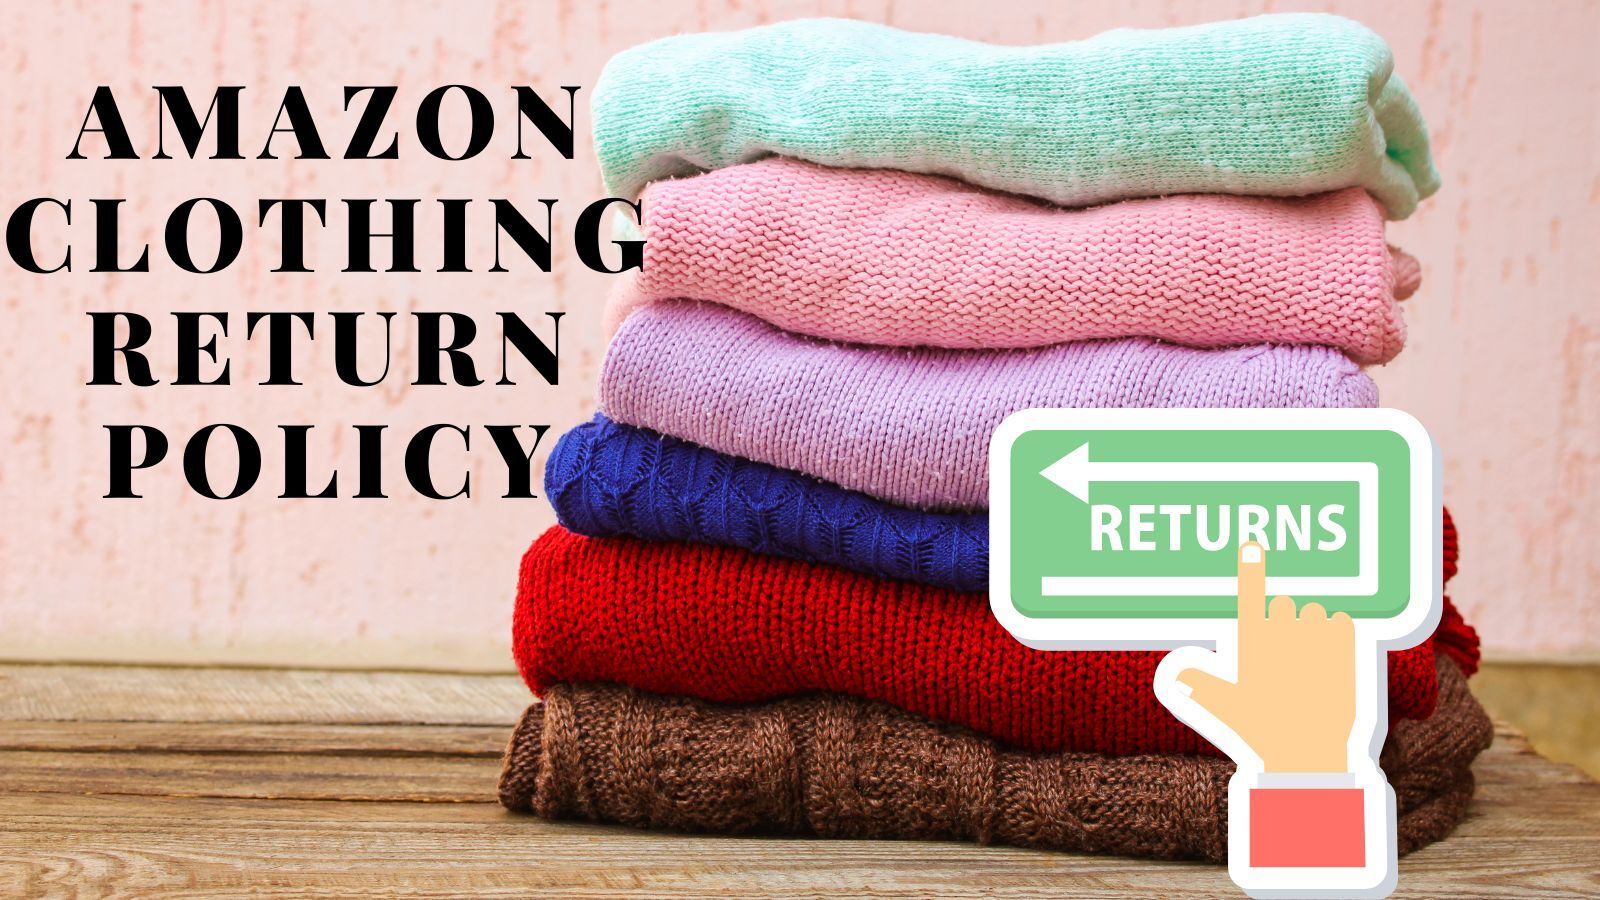 Amazon Clothing Return Policy (All You Need to Know!)